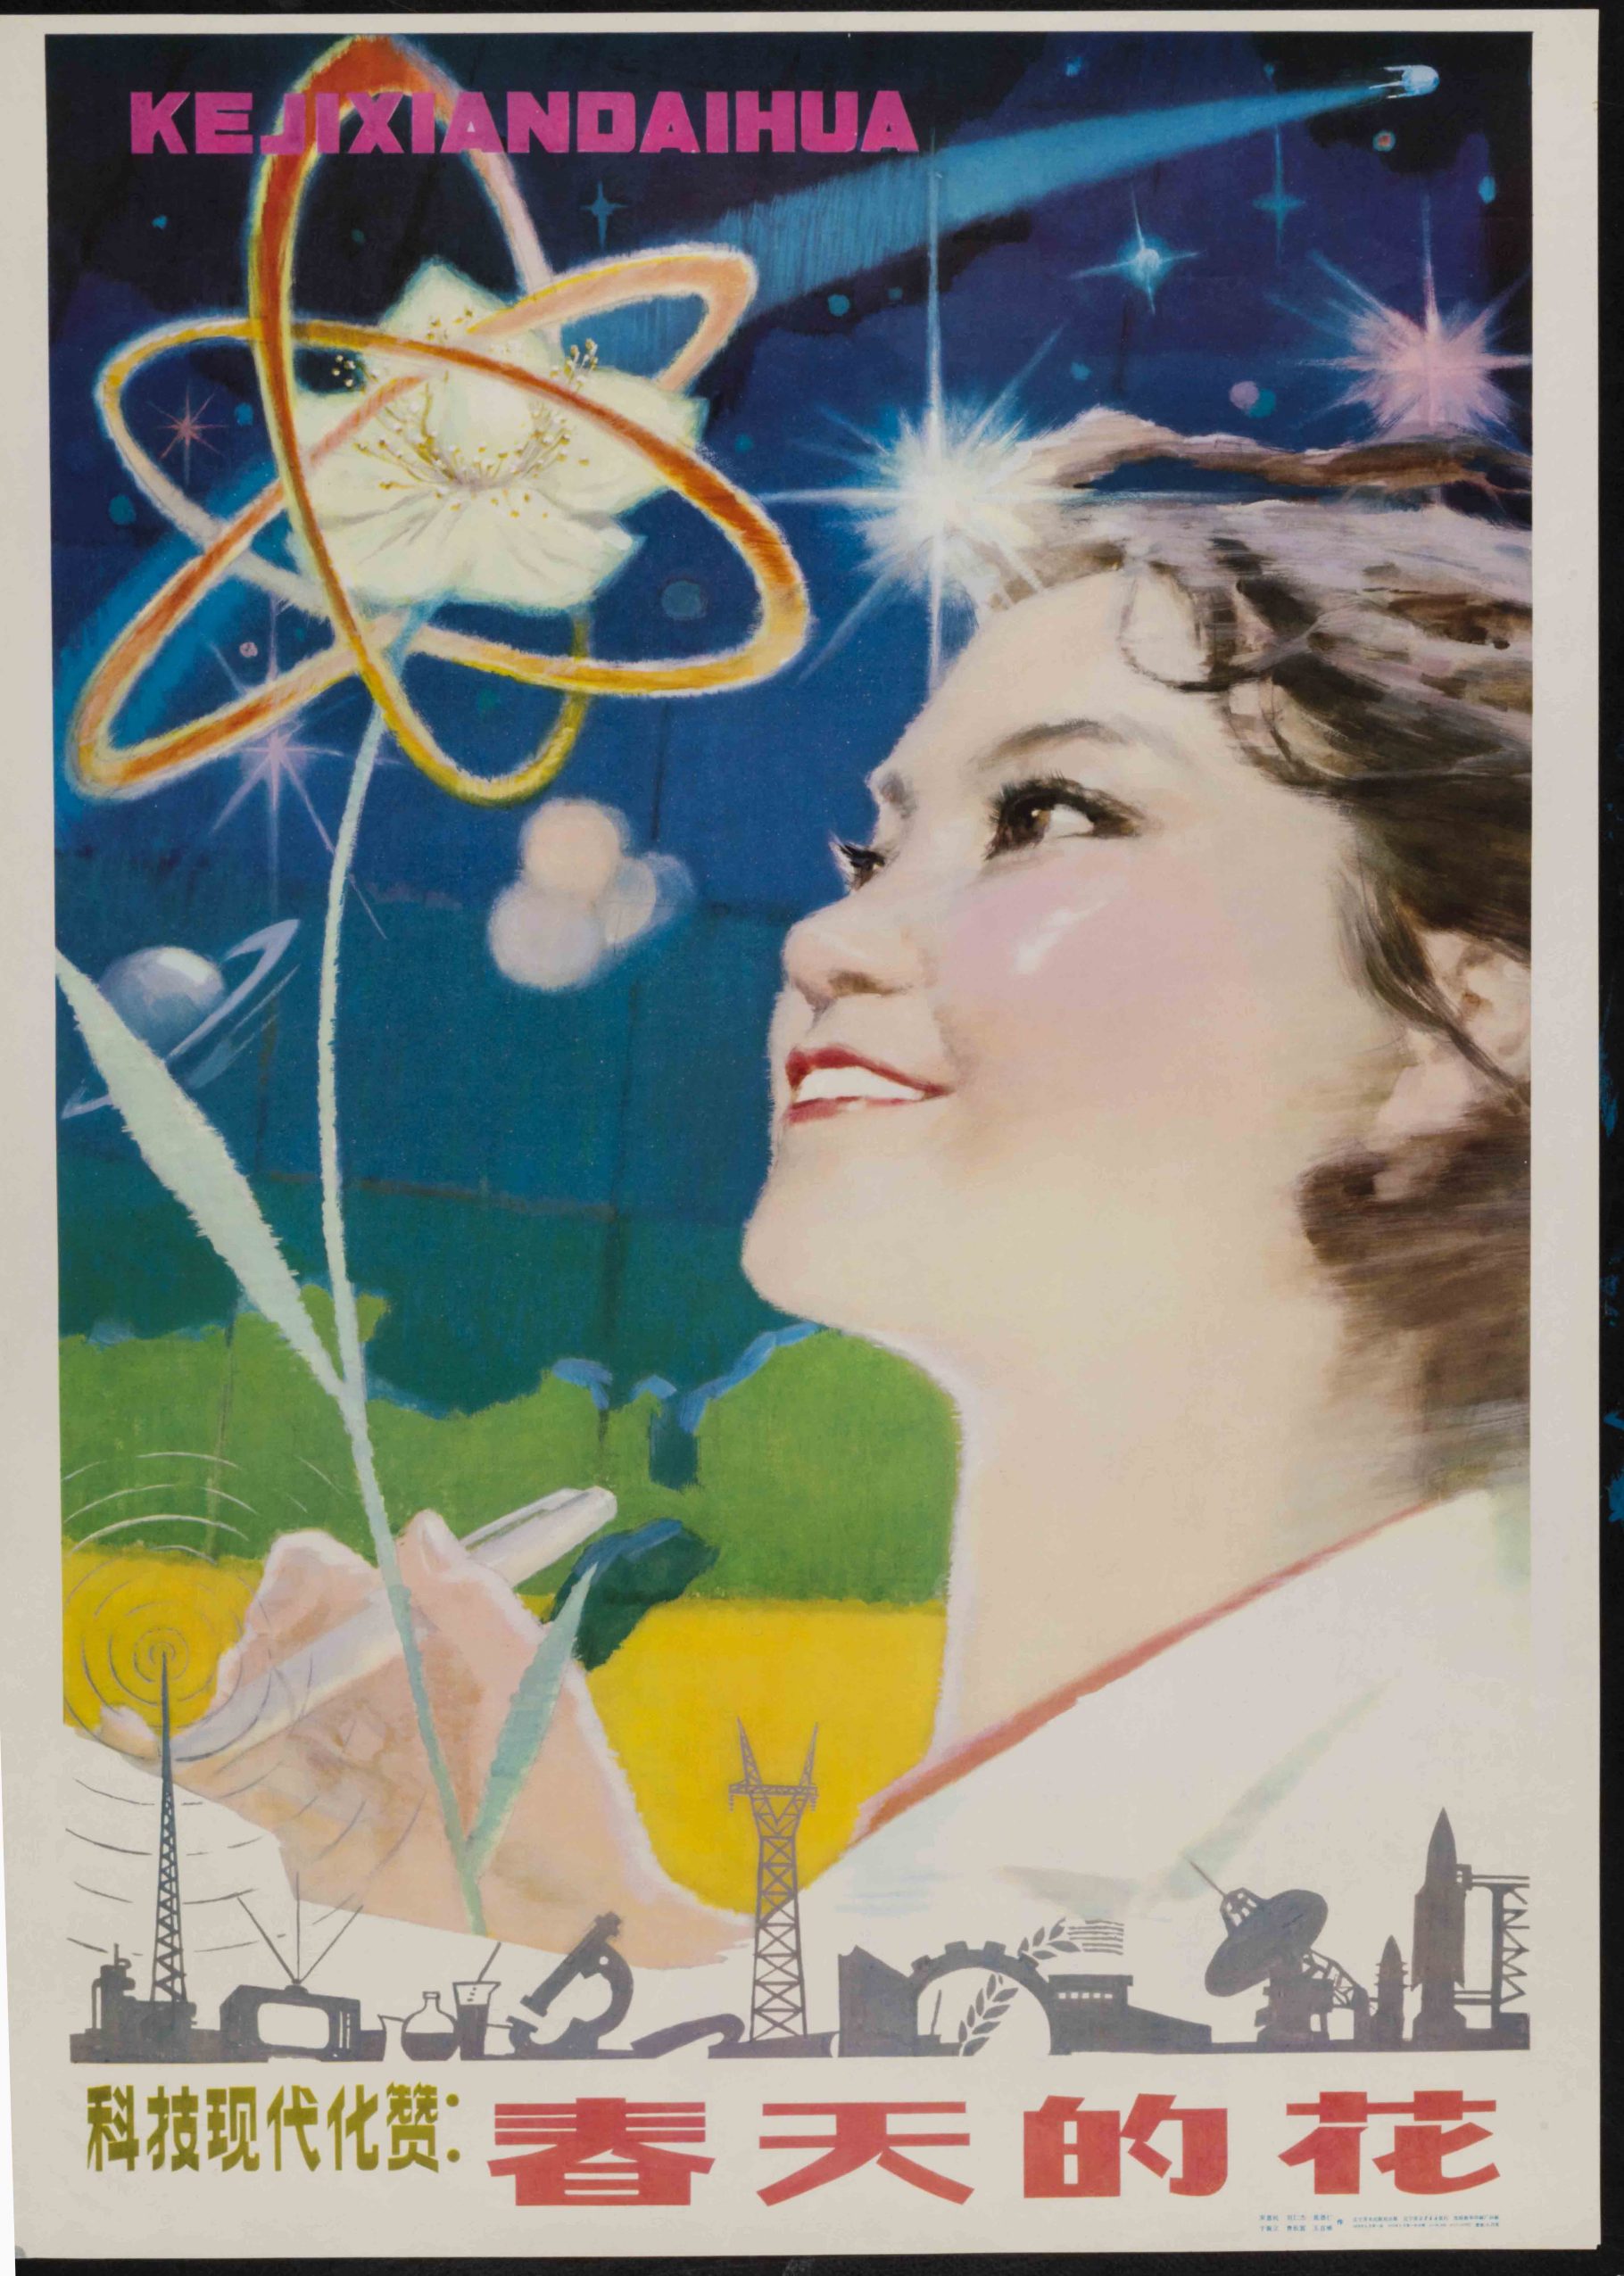 A young woman stares at a stylized image of atom, but that has a flower as the nucleus. Beneath are images of science and technology: rocket, satellite dish, electricity tower, microscope, television etc.